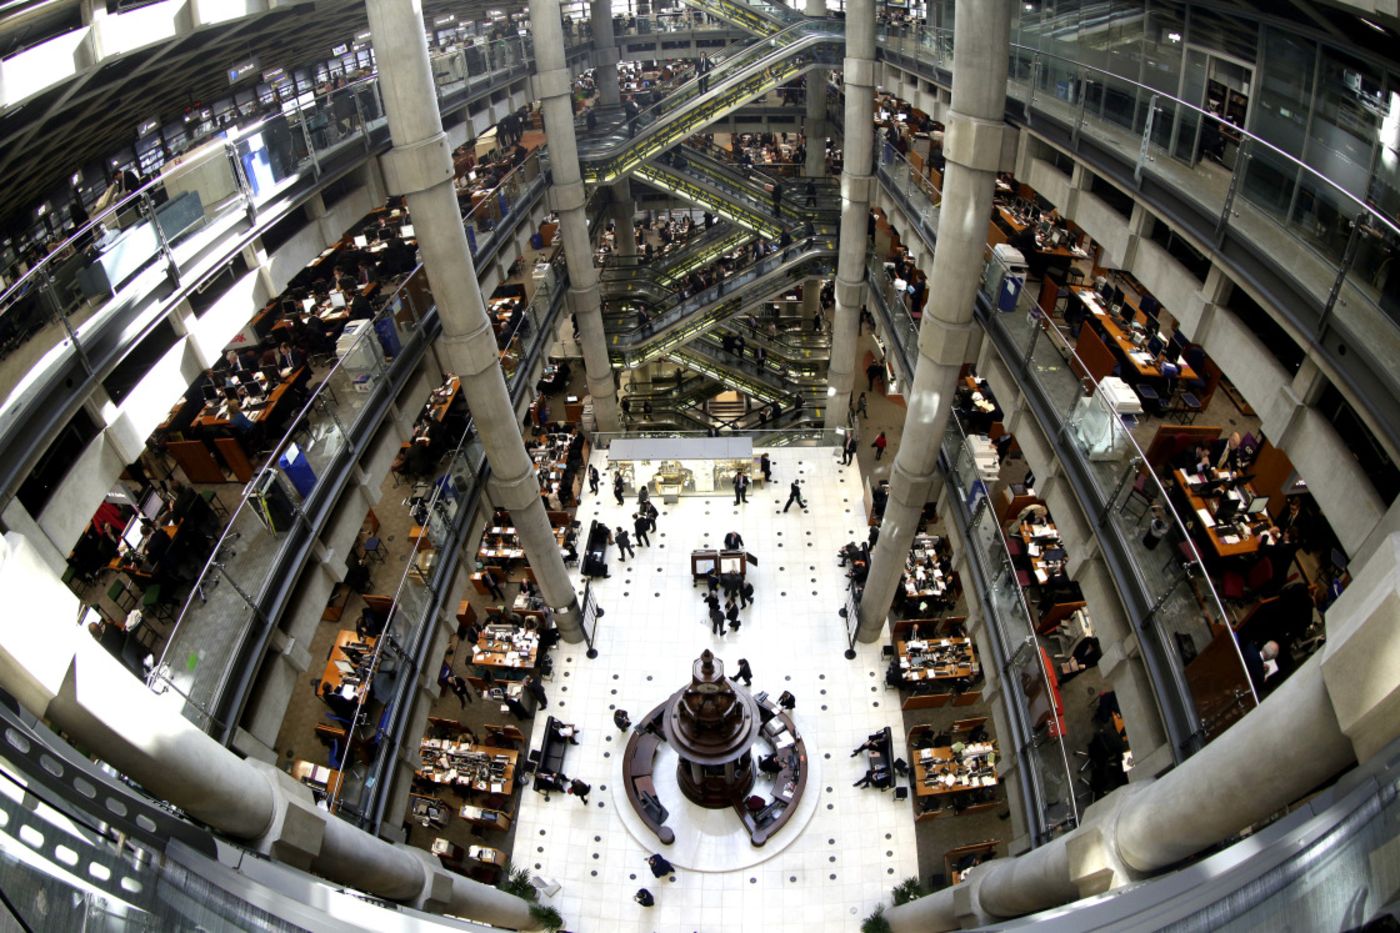 The interior of the Lloyd's of London building.